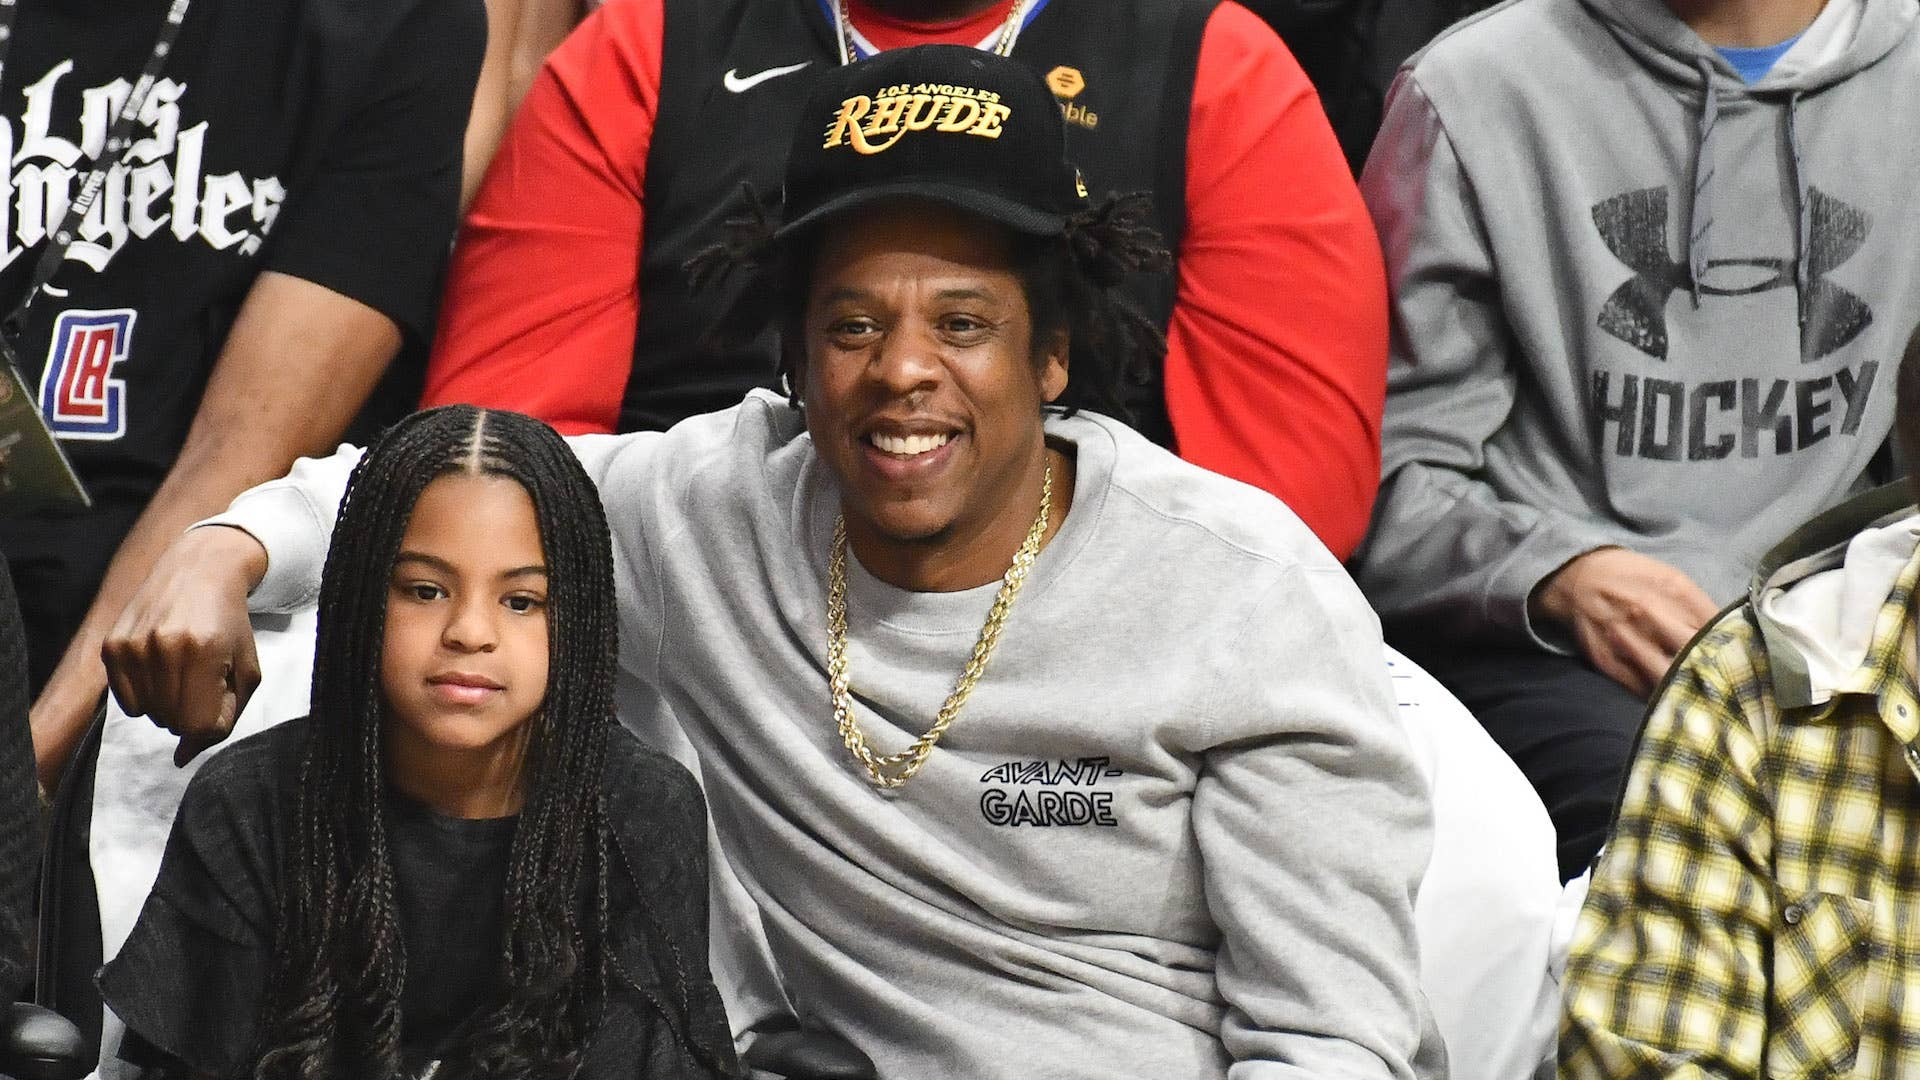 ay Z and Blue Ivy Carter attend a basketball game